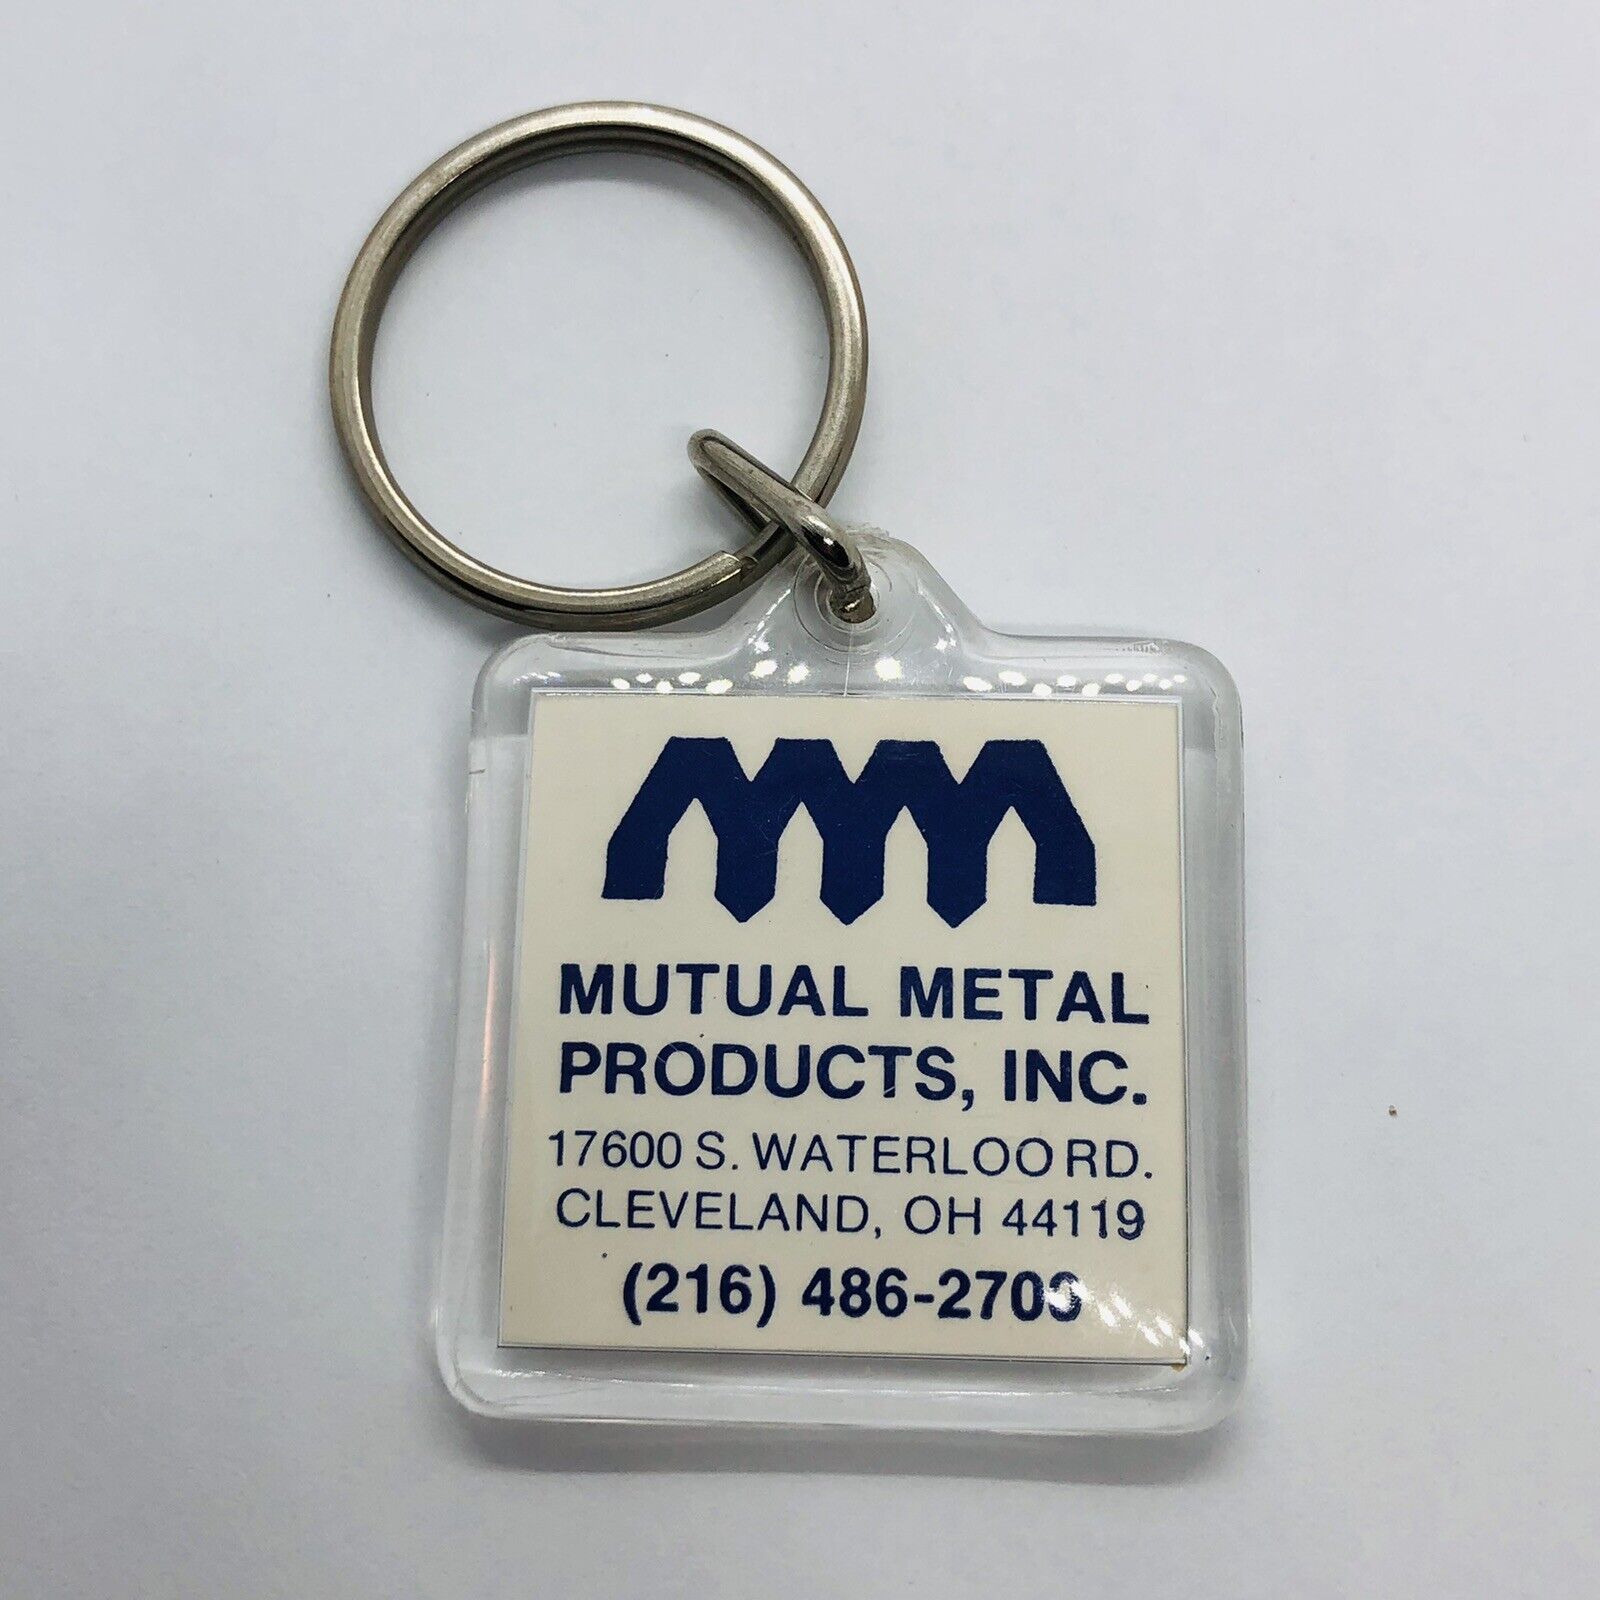 Vtg Mutual Metal Products Advertising Acrylic Keychain - Cleveland OH